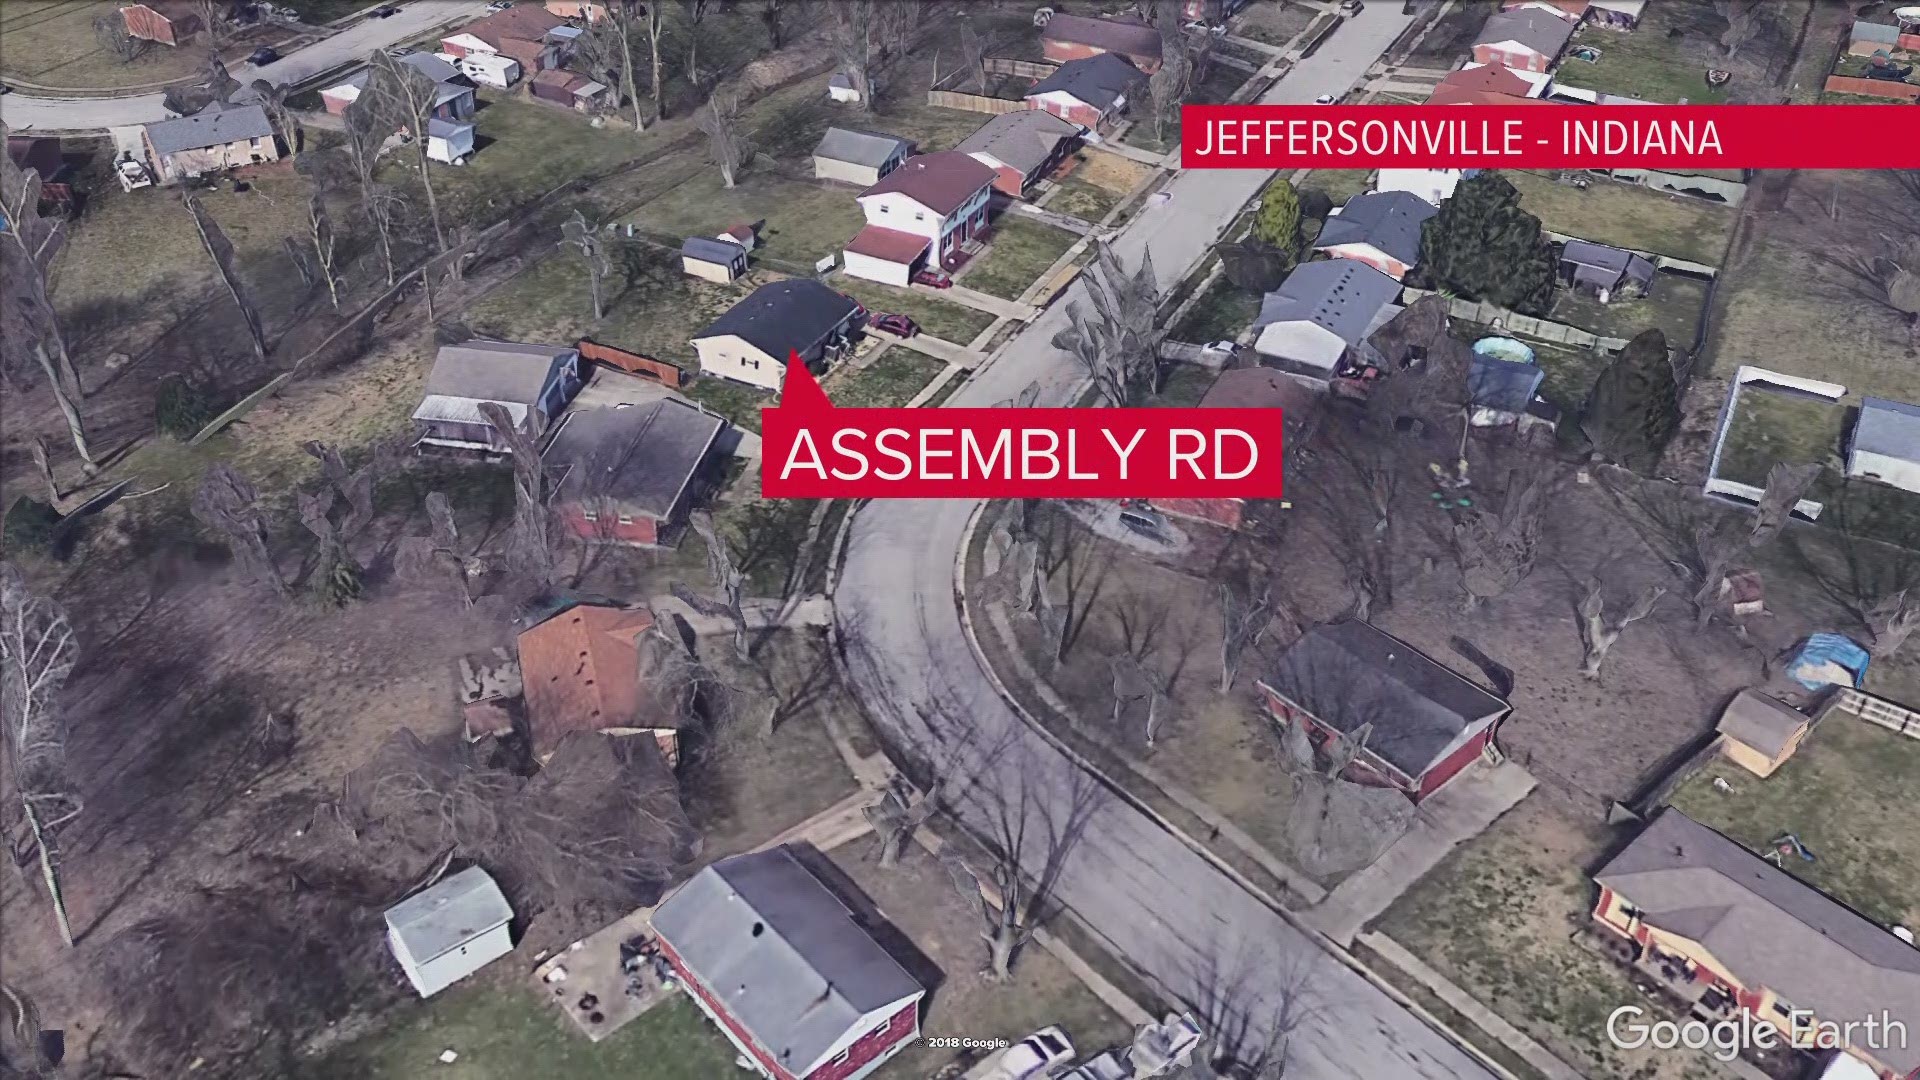 This clip shows the general area of where the house explosion occurred in Jeffersonville, Indiana.